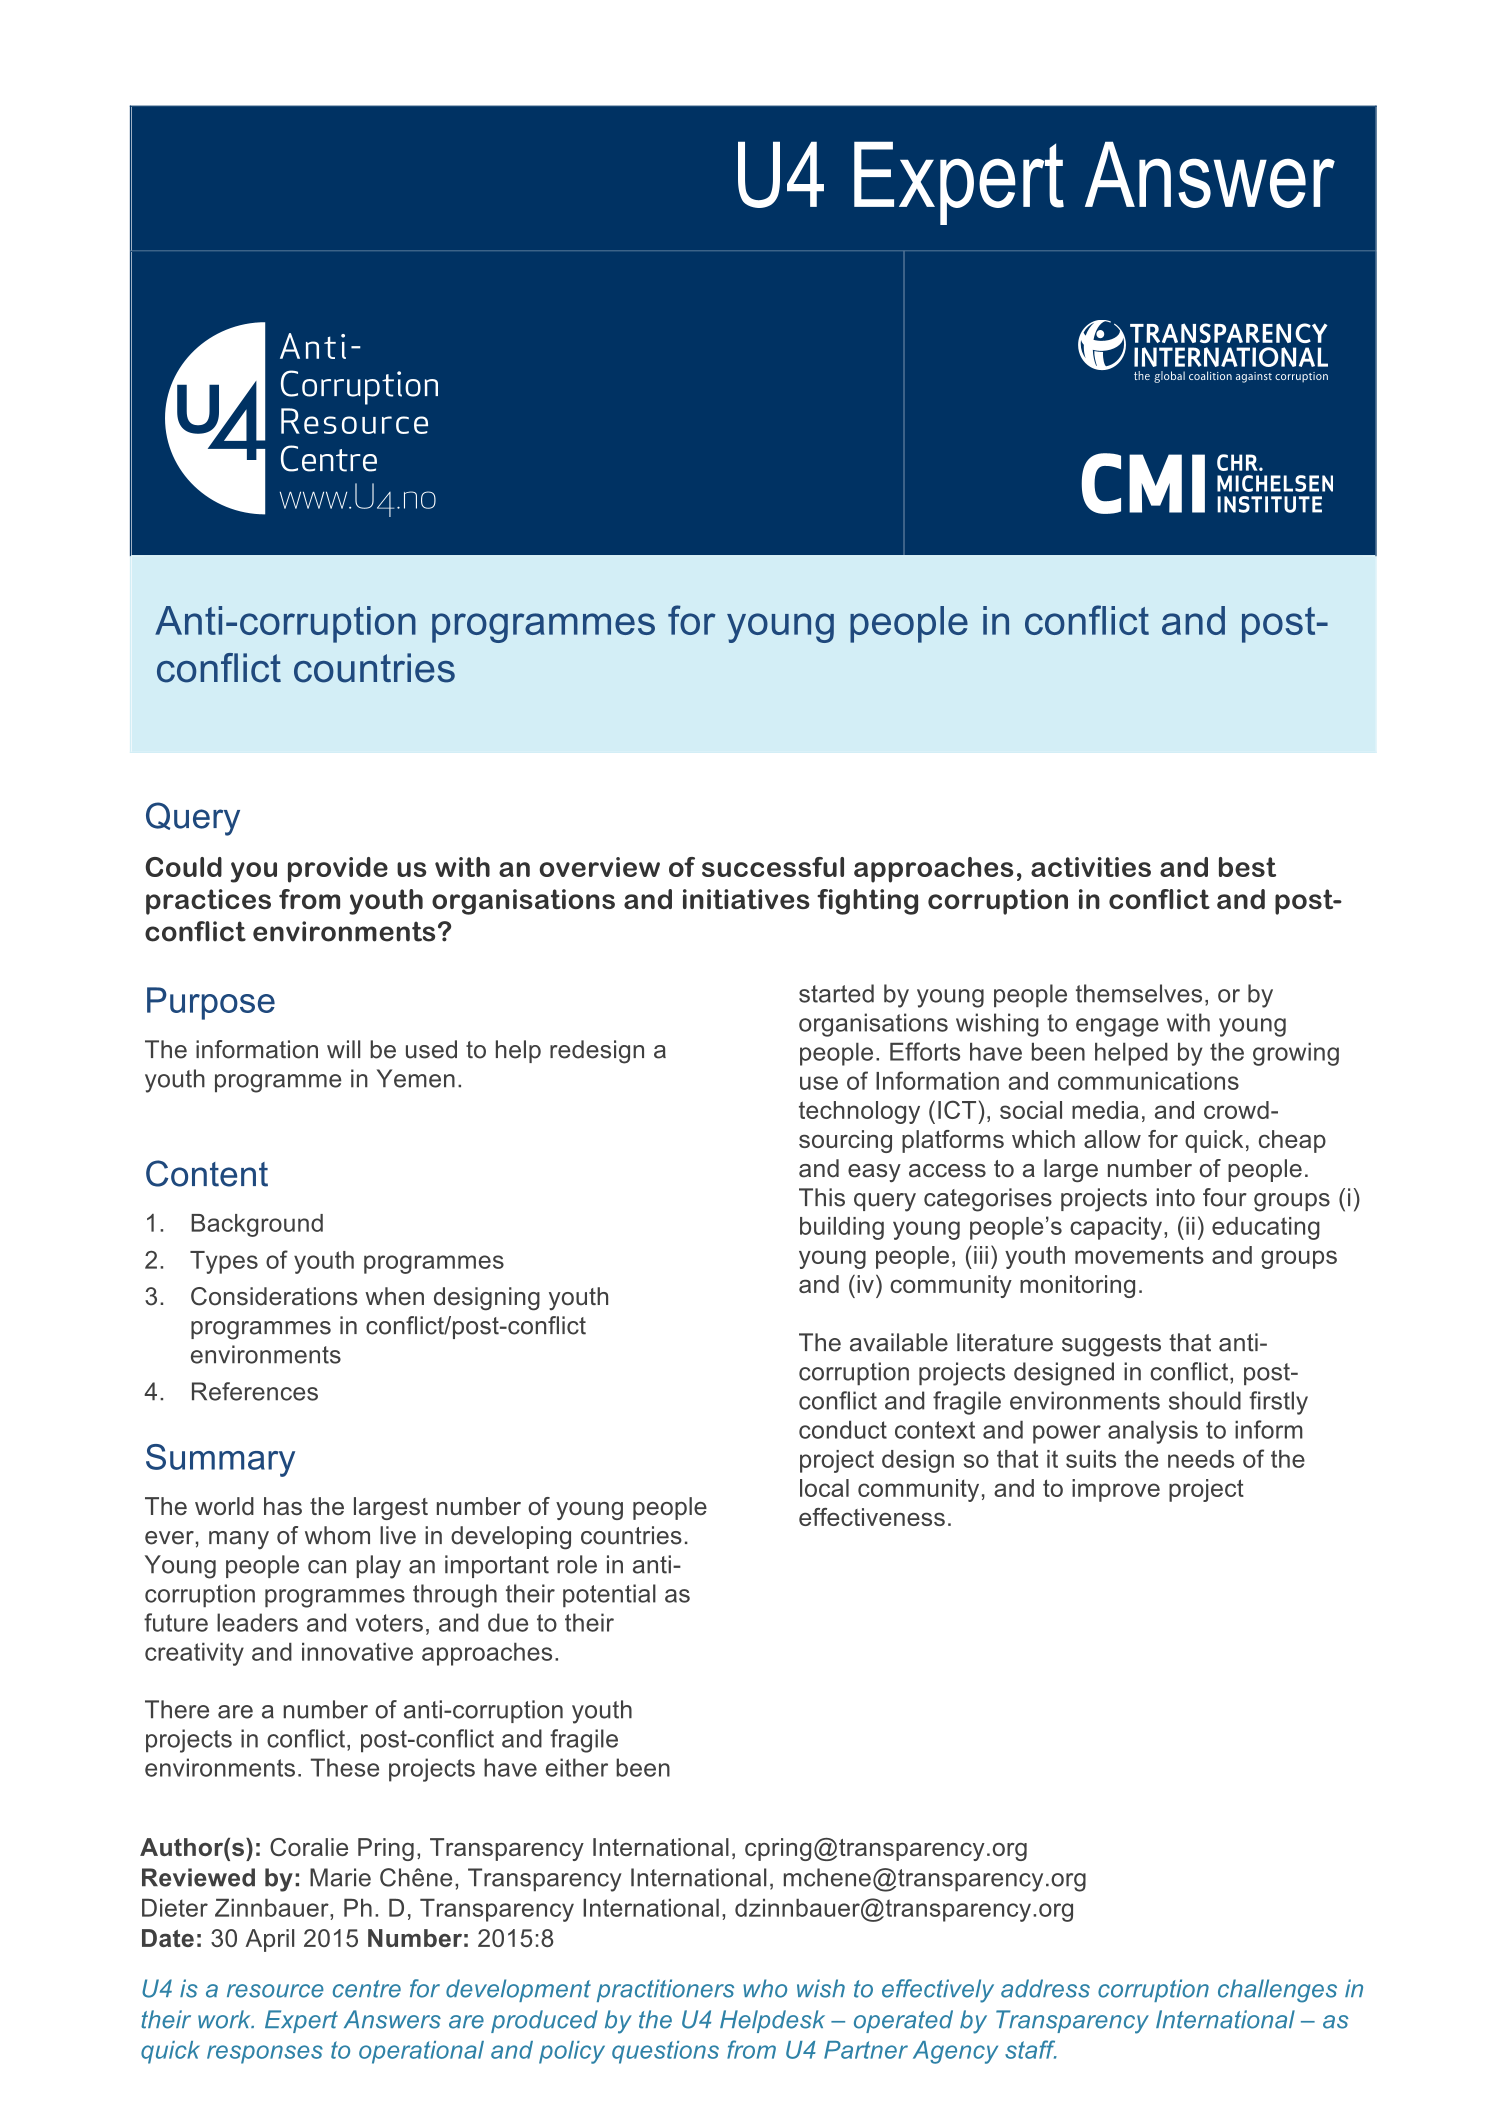 Anti-corruption programmes for young people in conflict and post-conflict countries